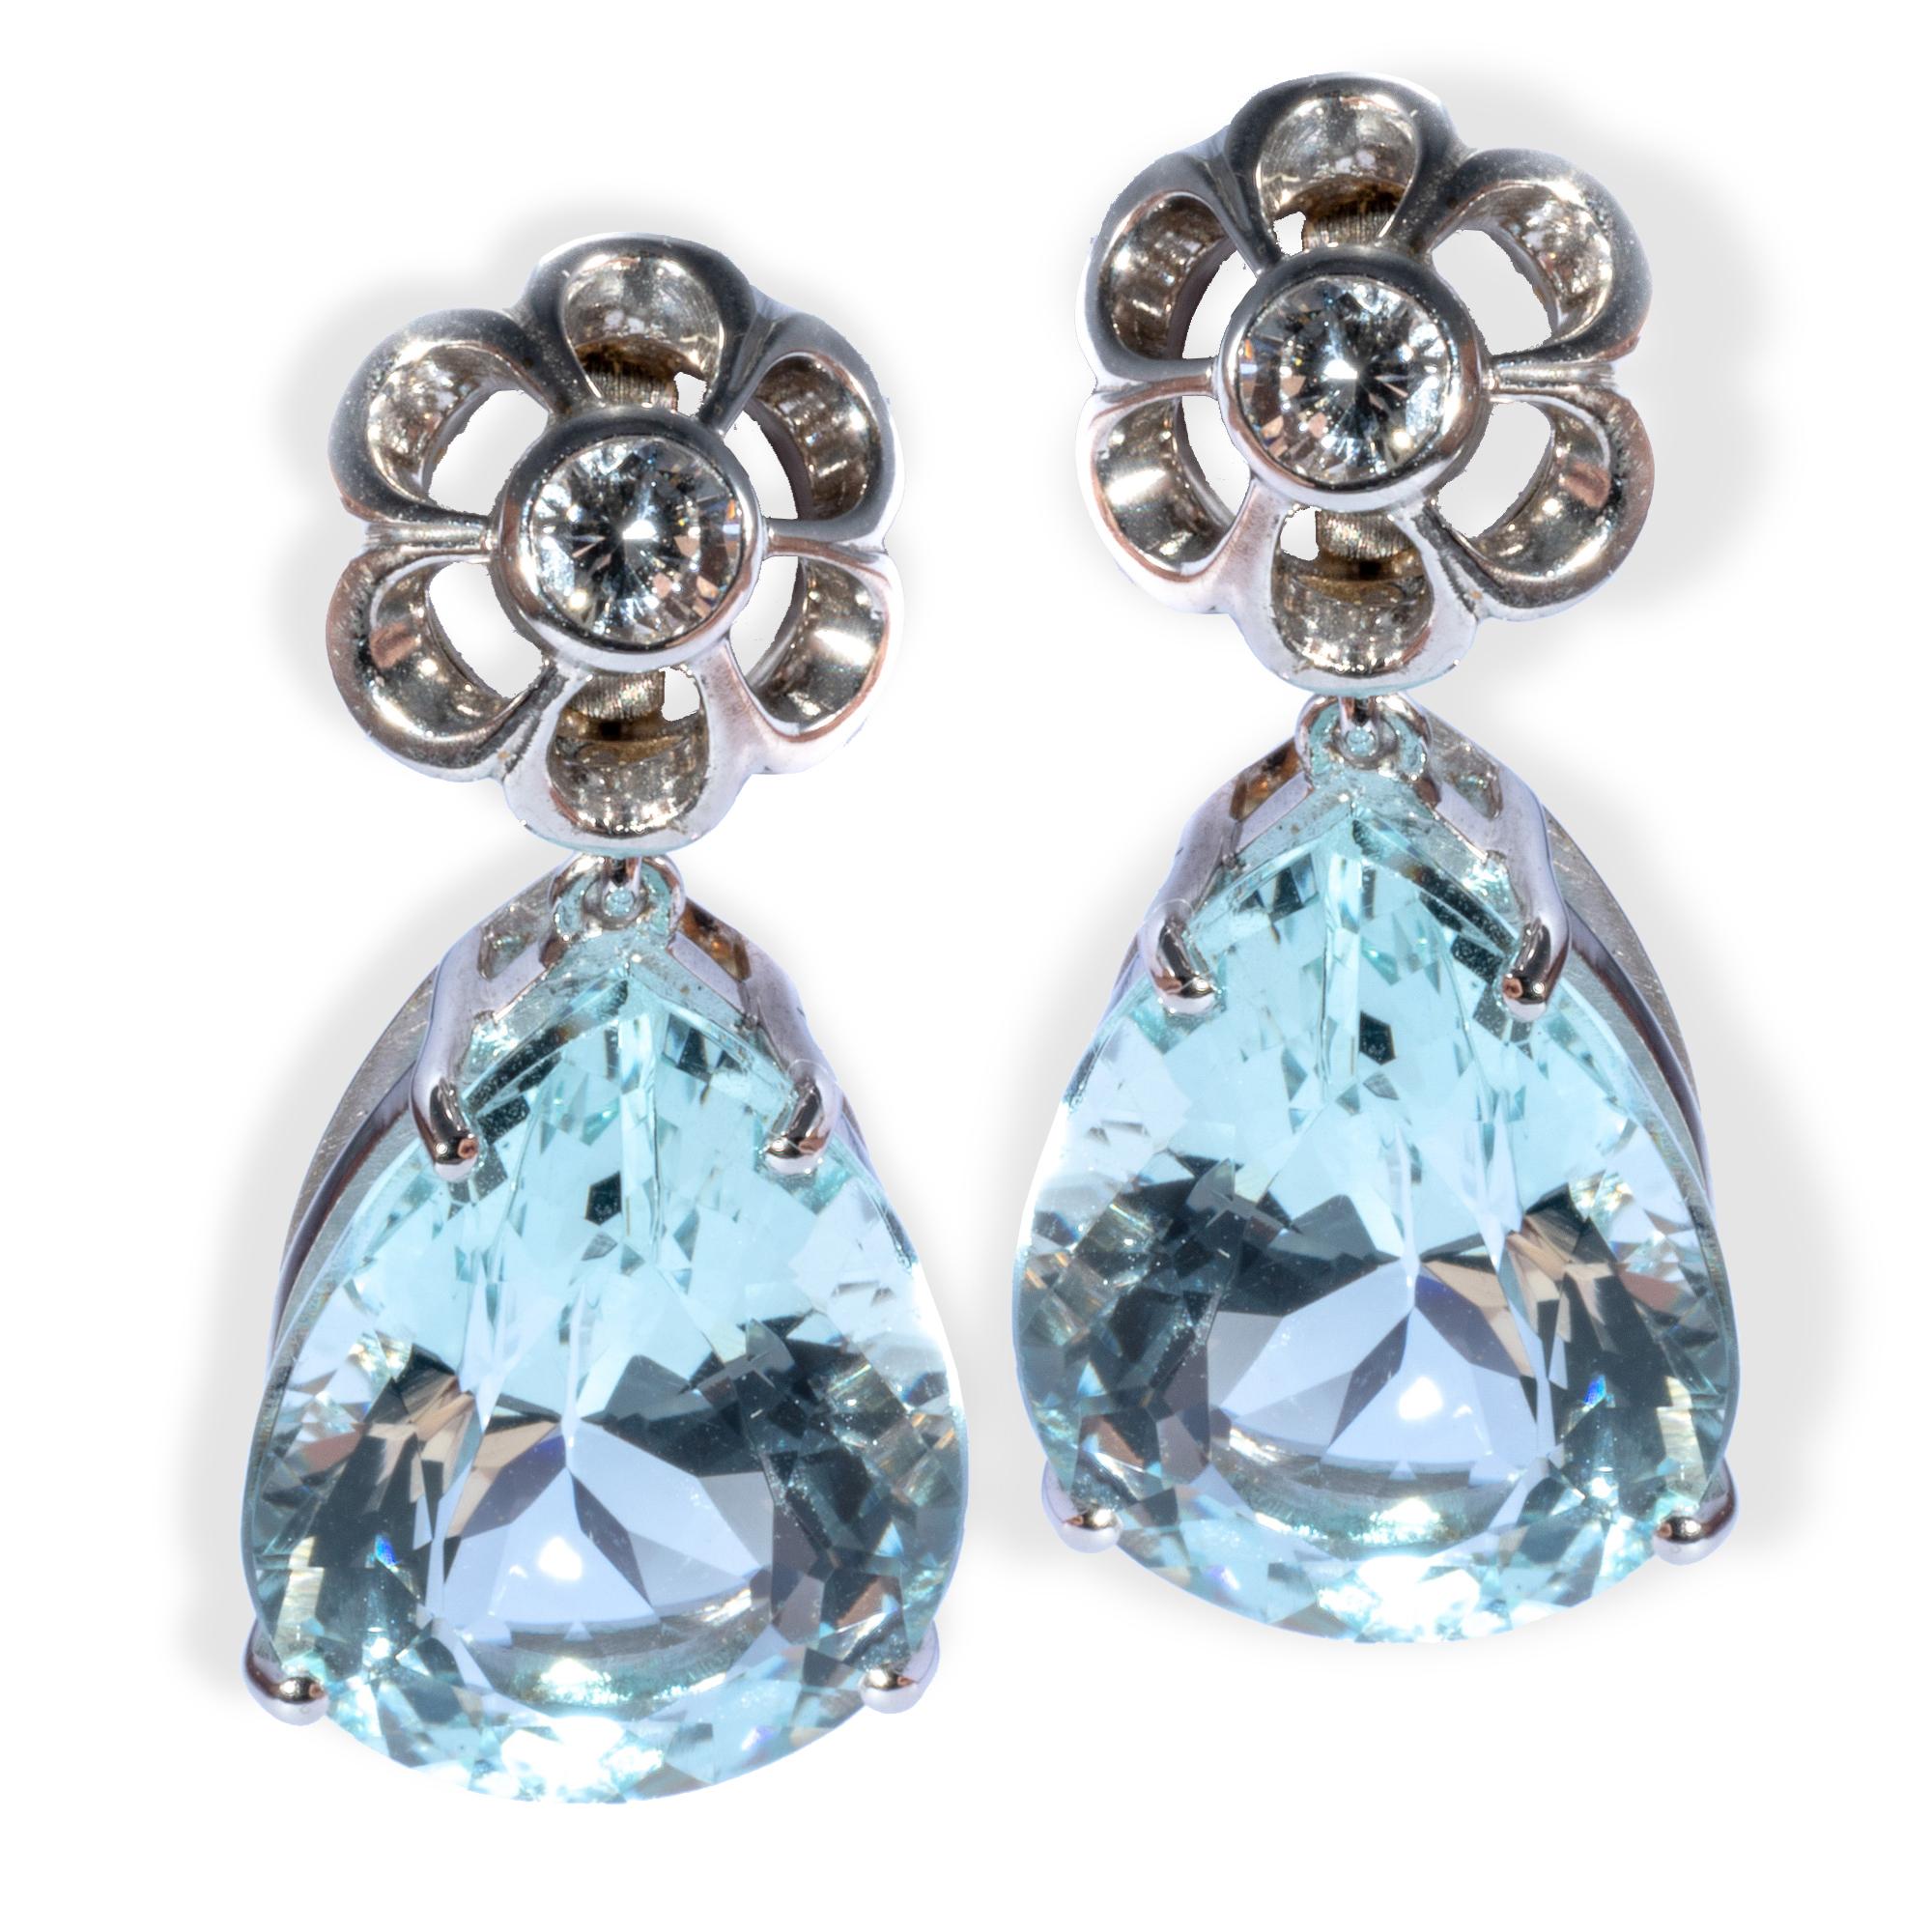 Handmade 18 karats white gold earrings with 2 aquamarines 19.49 carats and 2 diamonds 0.40 carats set in a retrò look flower. Made for a gala night or a cocktail party.
